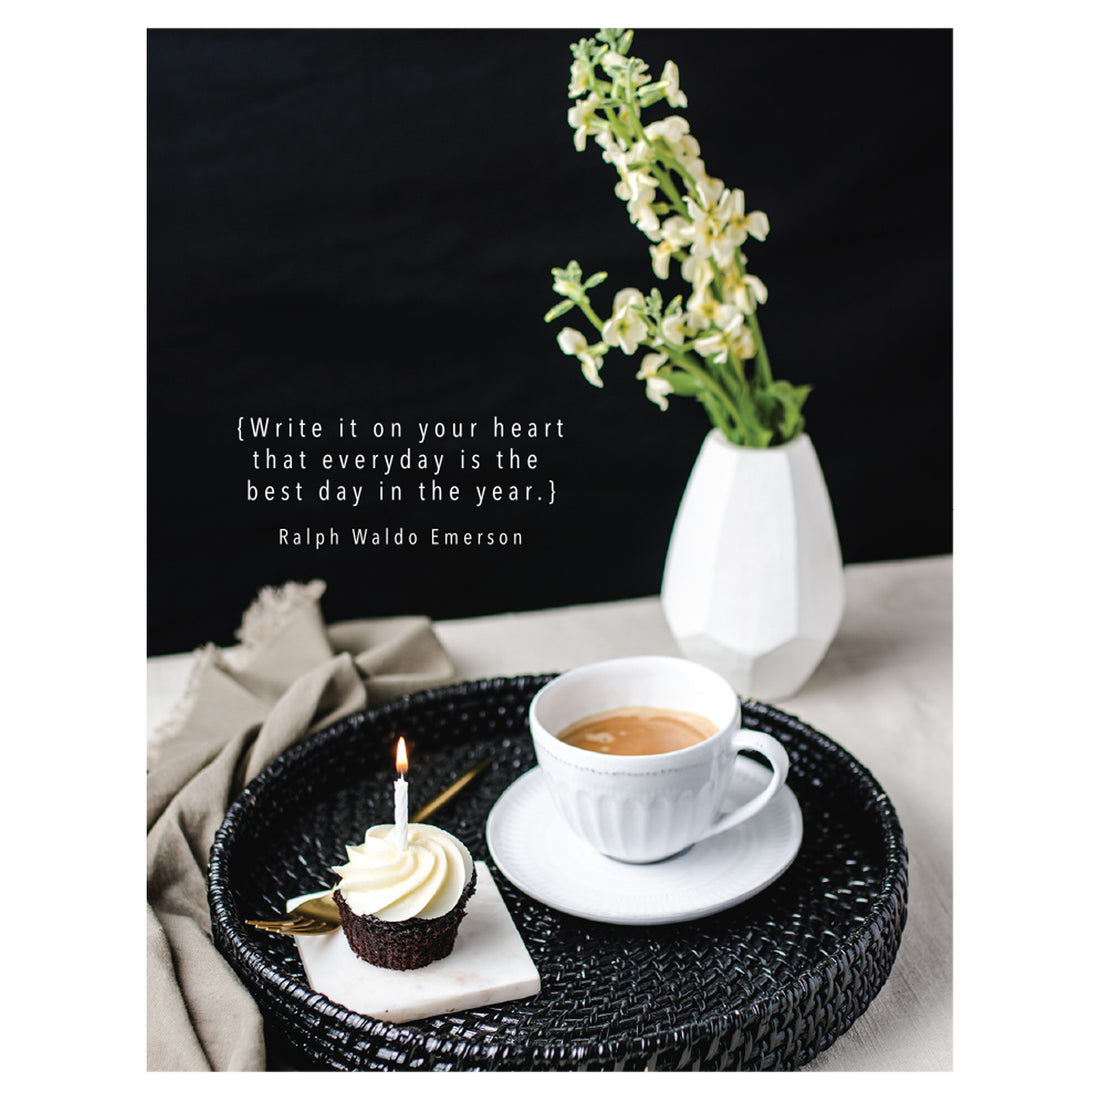 A photo of a round black tray with a cup of coffee and a cupcake with a lit candle, sitting on a white table with a white vase of flowers on a black background, with &quot;{Write it on your heart that everyday is the best day in the year.} Ralph Waldo Emerson&quot; printed in white.